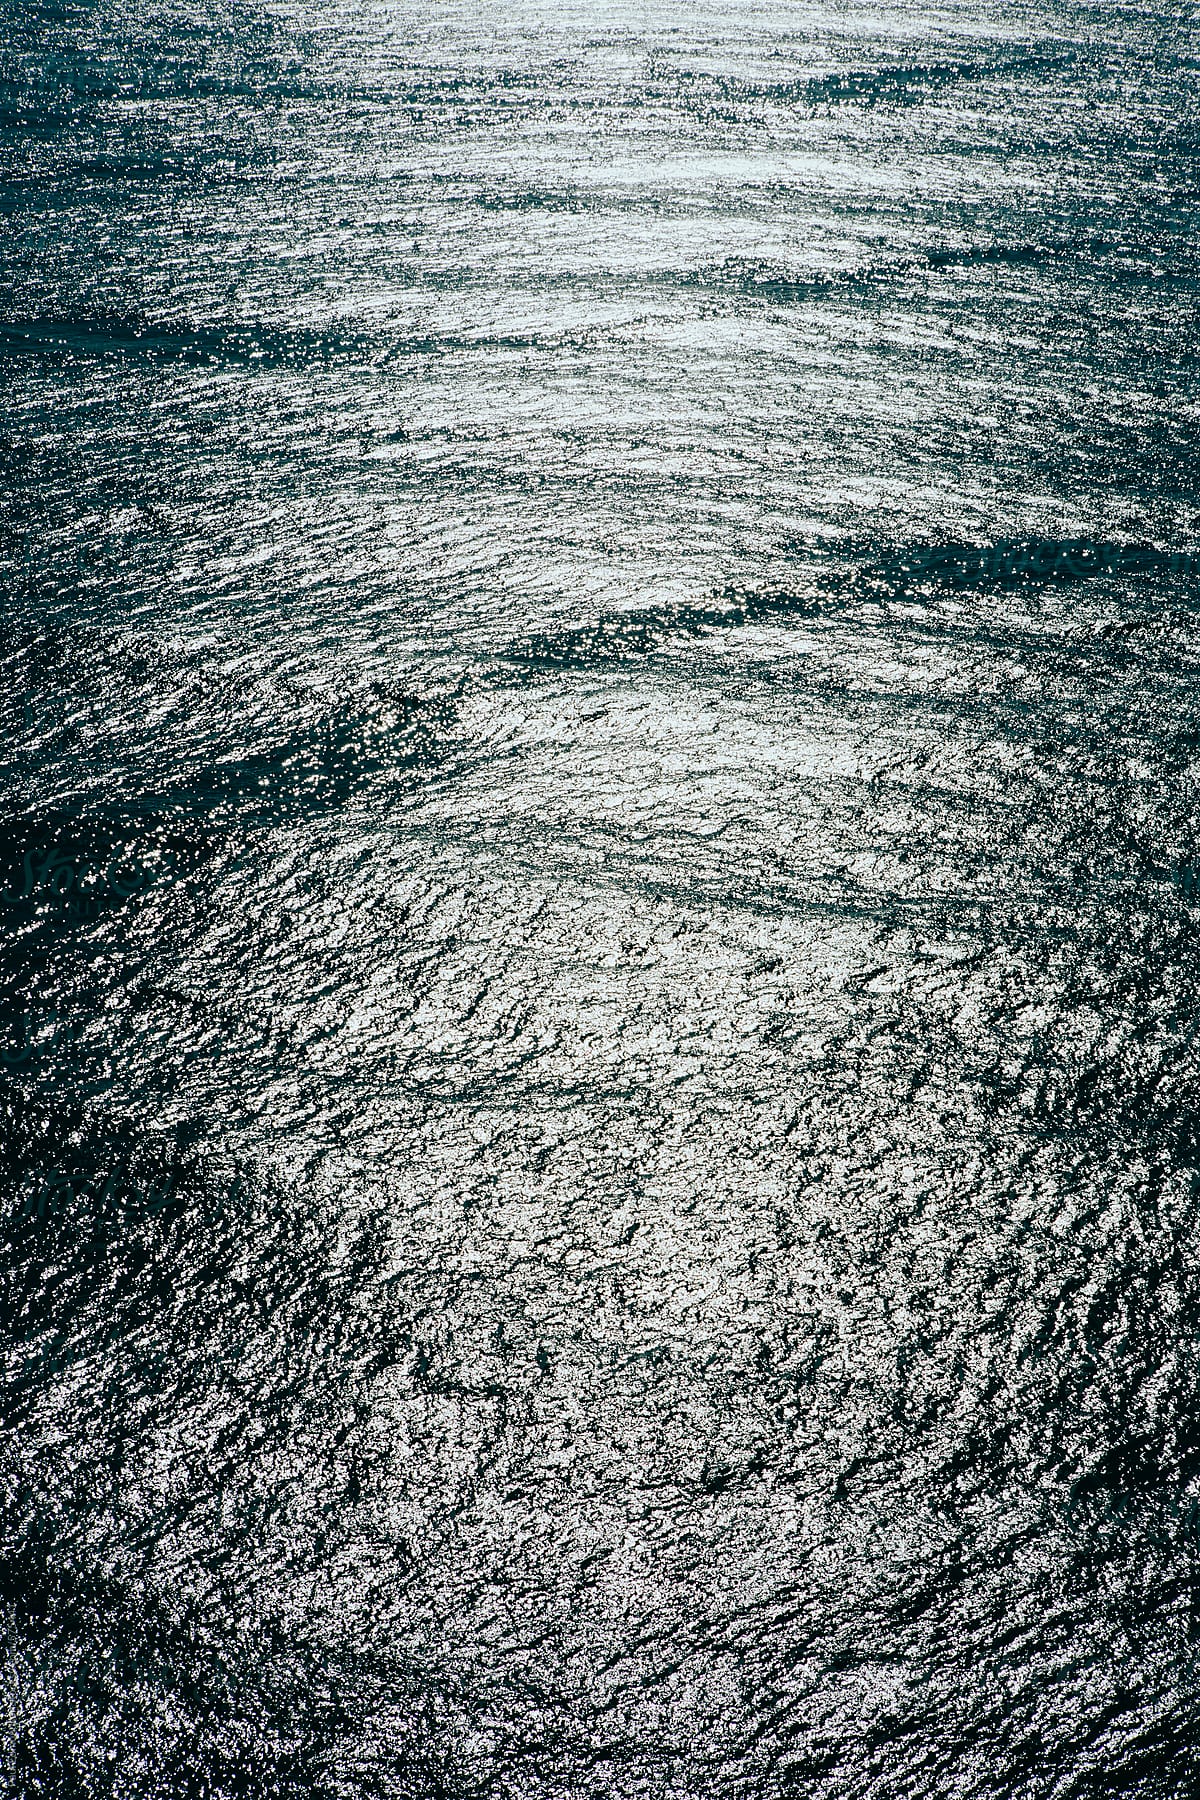 Detail of sunlight reflecting on ocean water